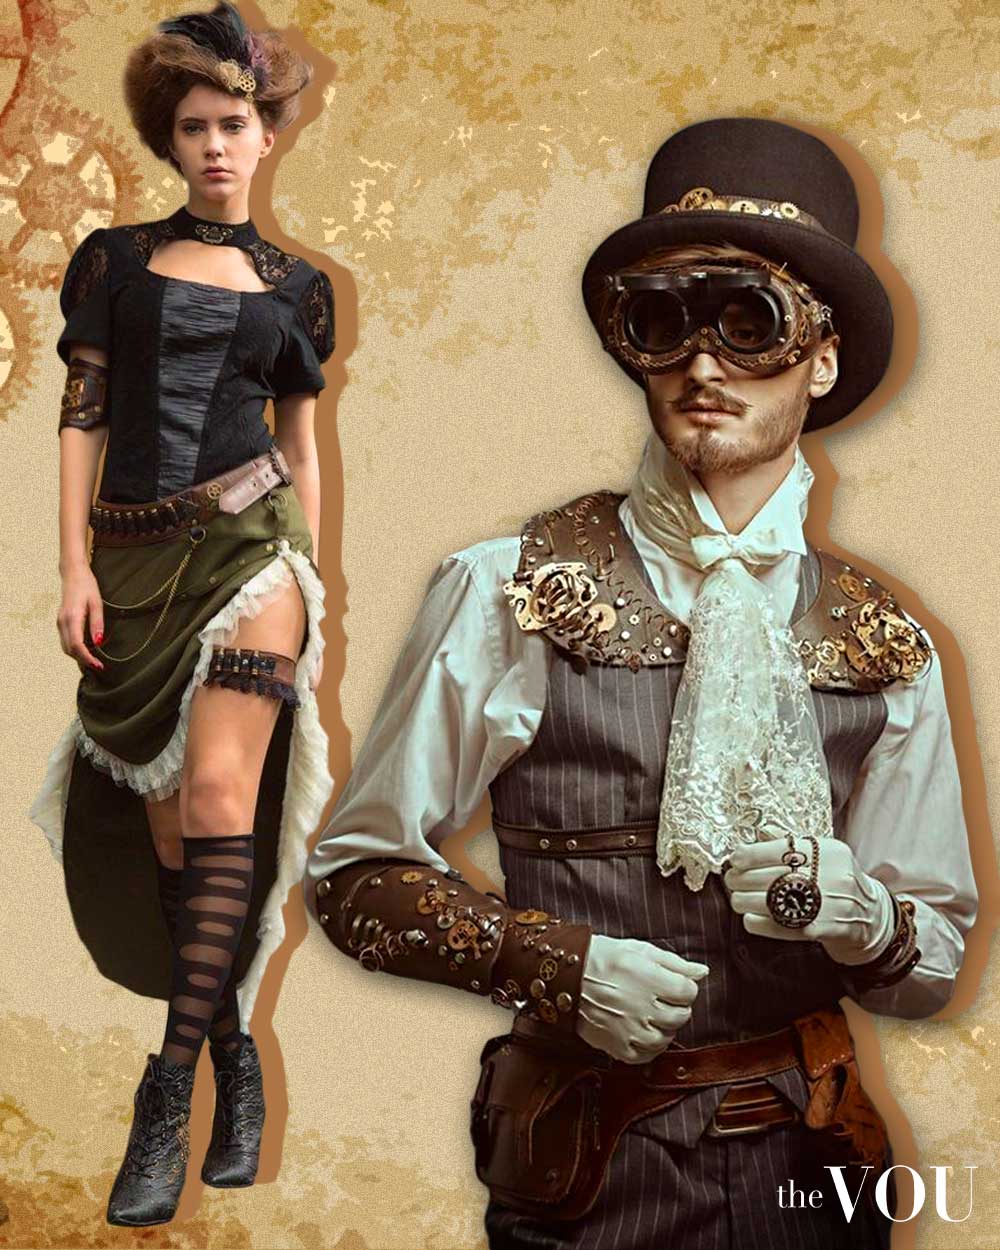 Ultimate Guide To Female Steampunk Fashion - SteampunkArtifacts